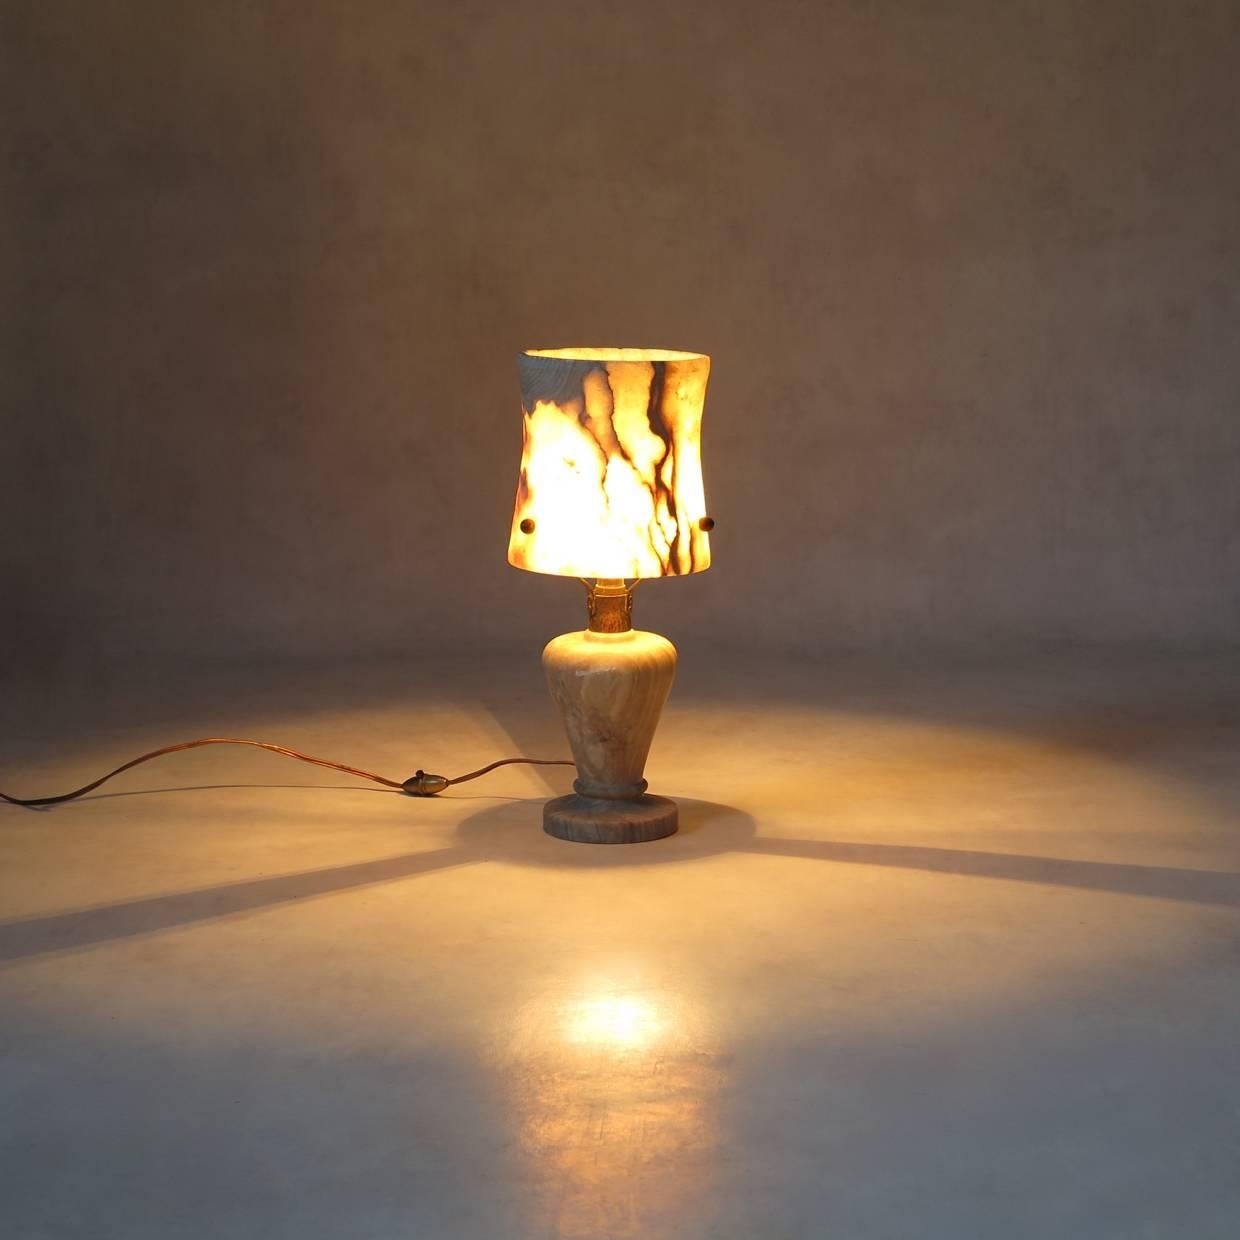 Unusual and very pretty table lamp carved out of solid mica. The lamp shade is almost a centimeter thick. When lit, all the veins in the stone come to life, and the lamp gives off a very lovely, soft light. The shade is fixed to the base by three